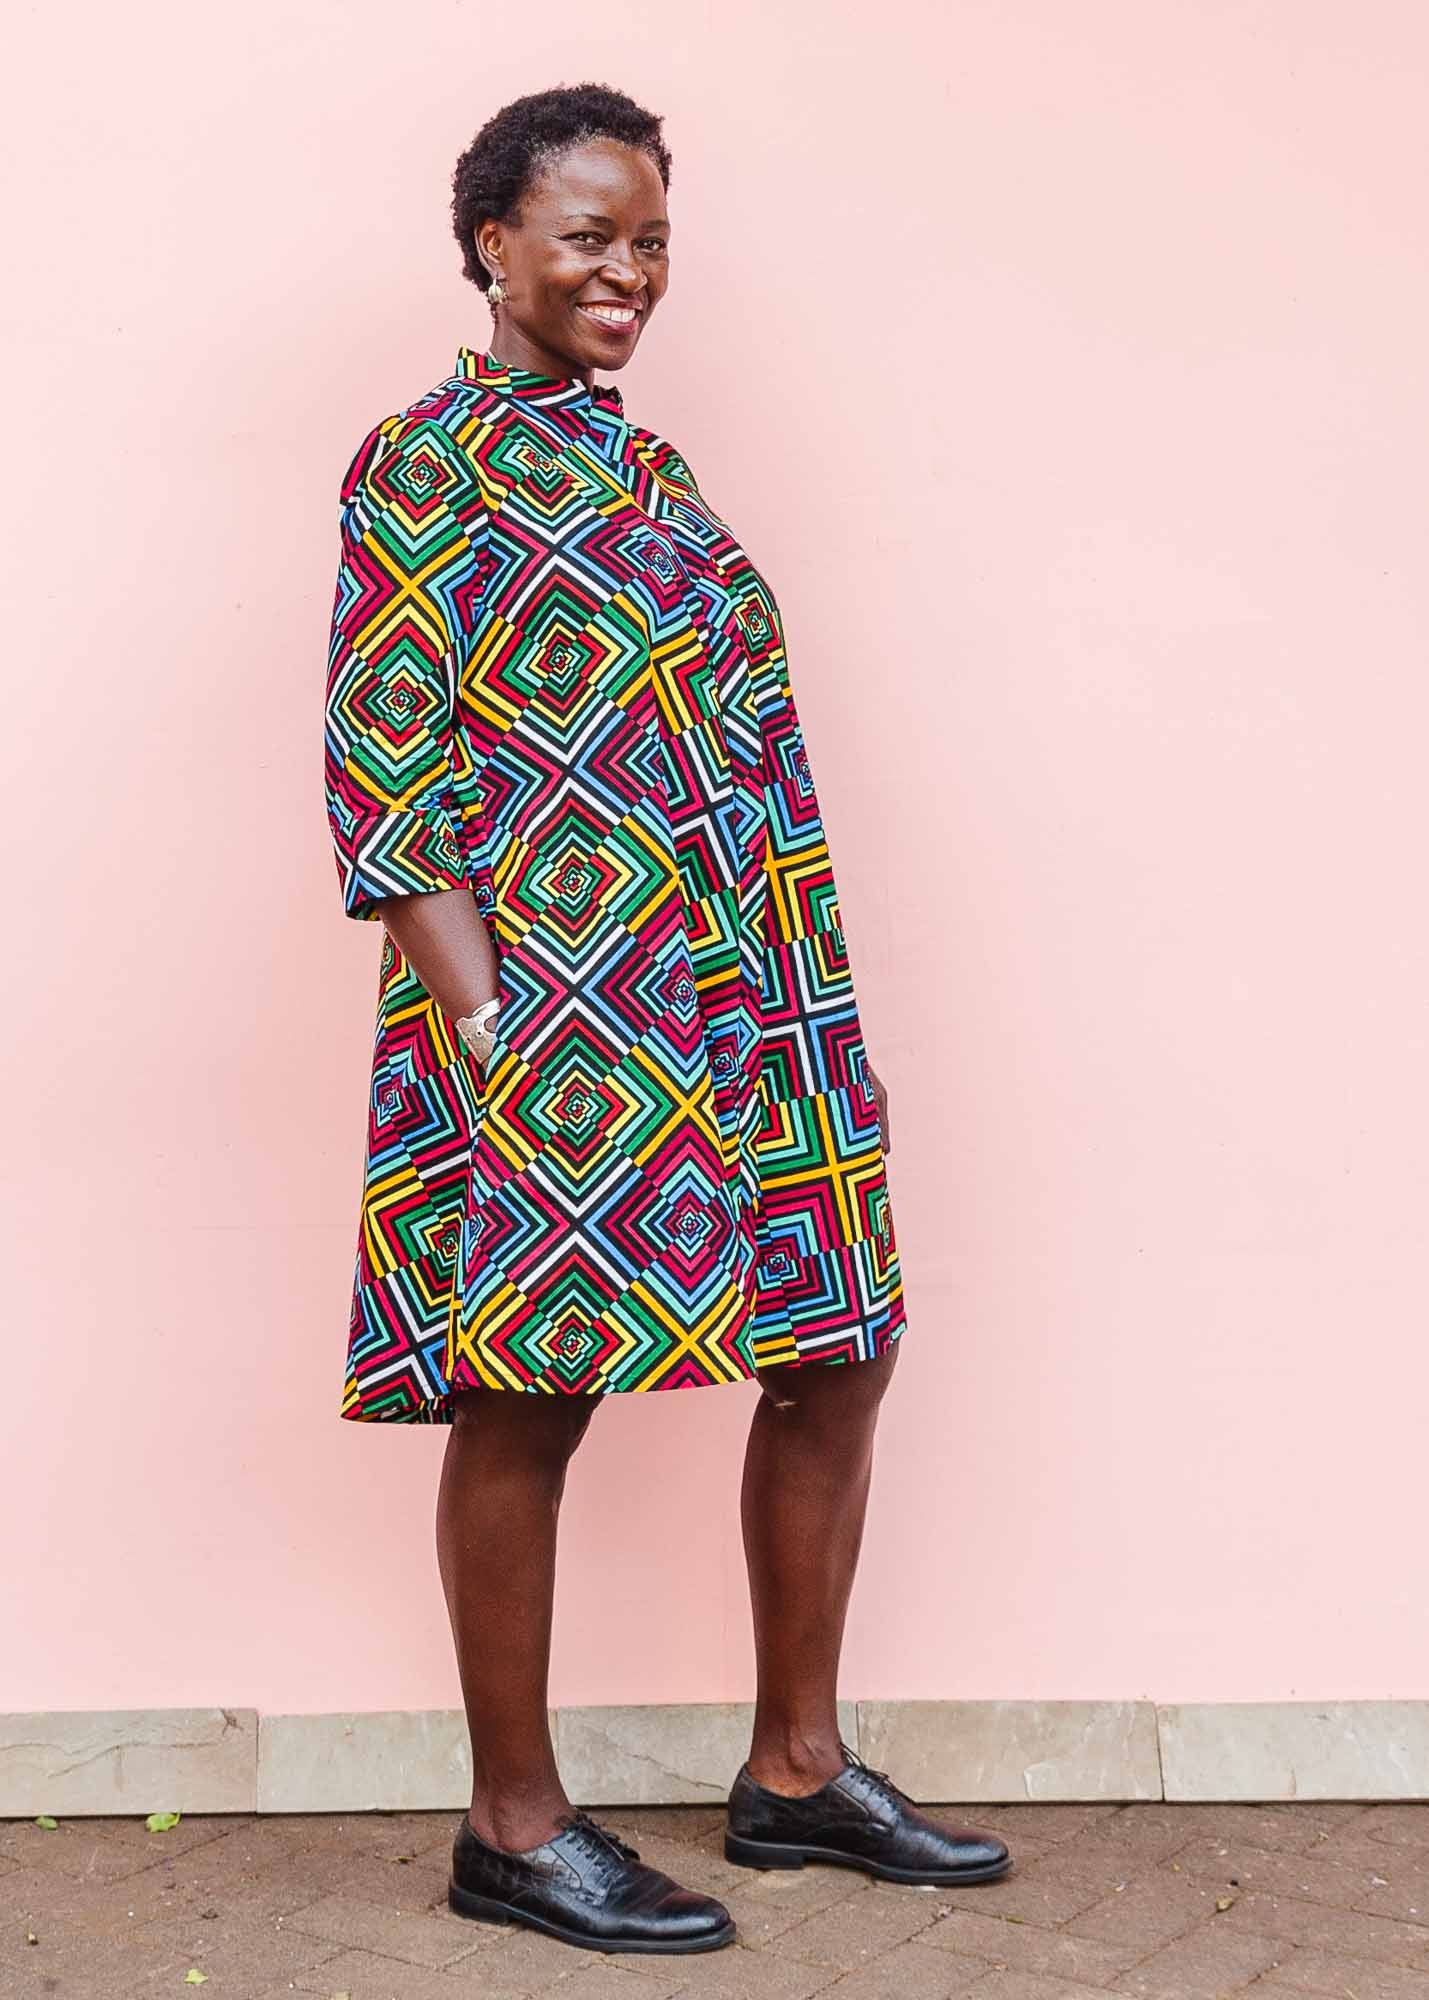 The model is wearing geometric print with rainbow colored dress 